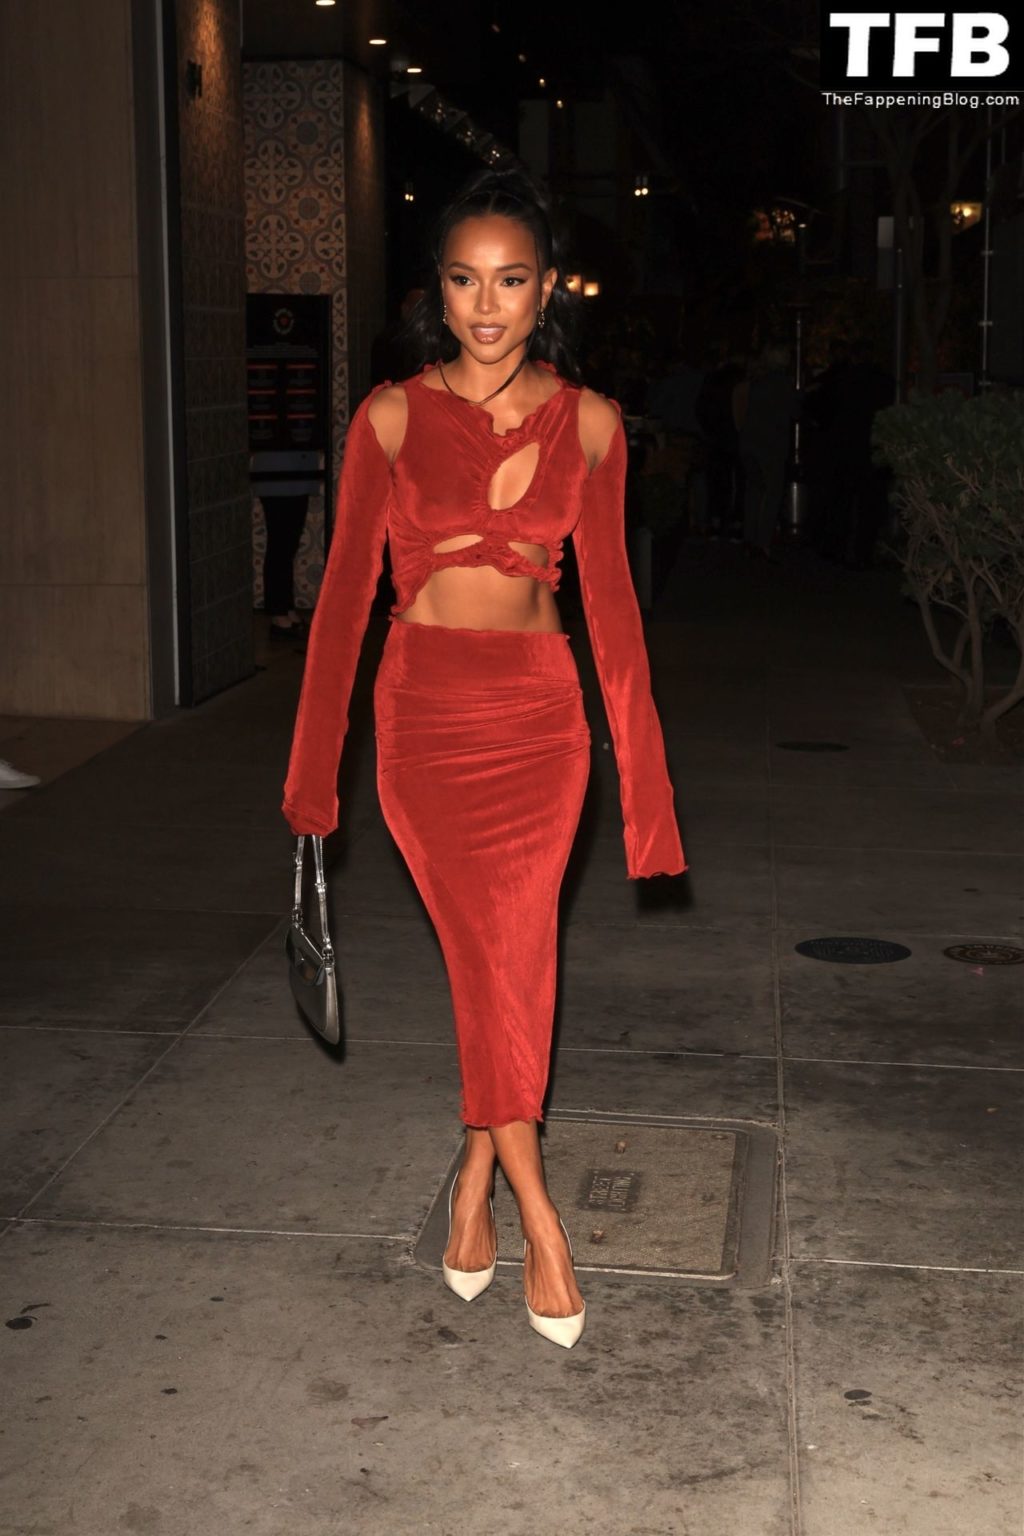 Karrueche Tran Sexy The Fappening Blog 18 1 1024x1536 - Karrueche Tran Shows Her Pokies in a Red Dress at The Hollywood Reporter’s Oscar Nominees Night (68 Photos)